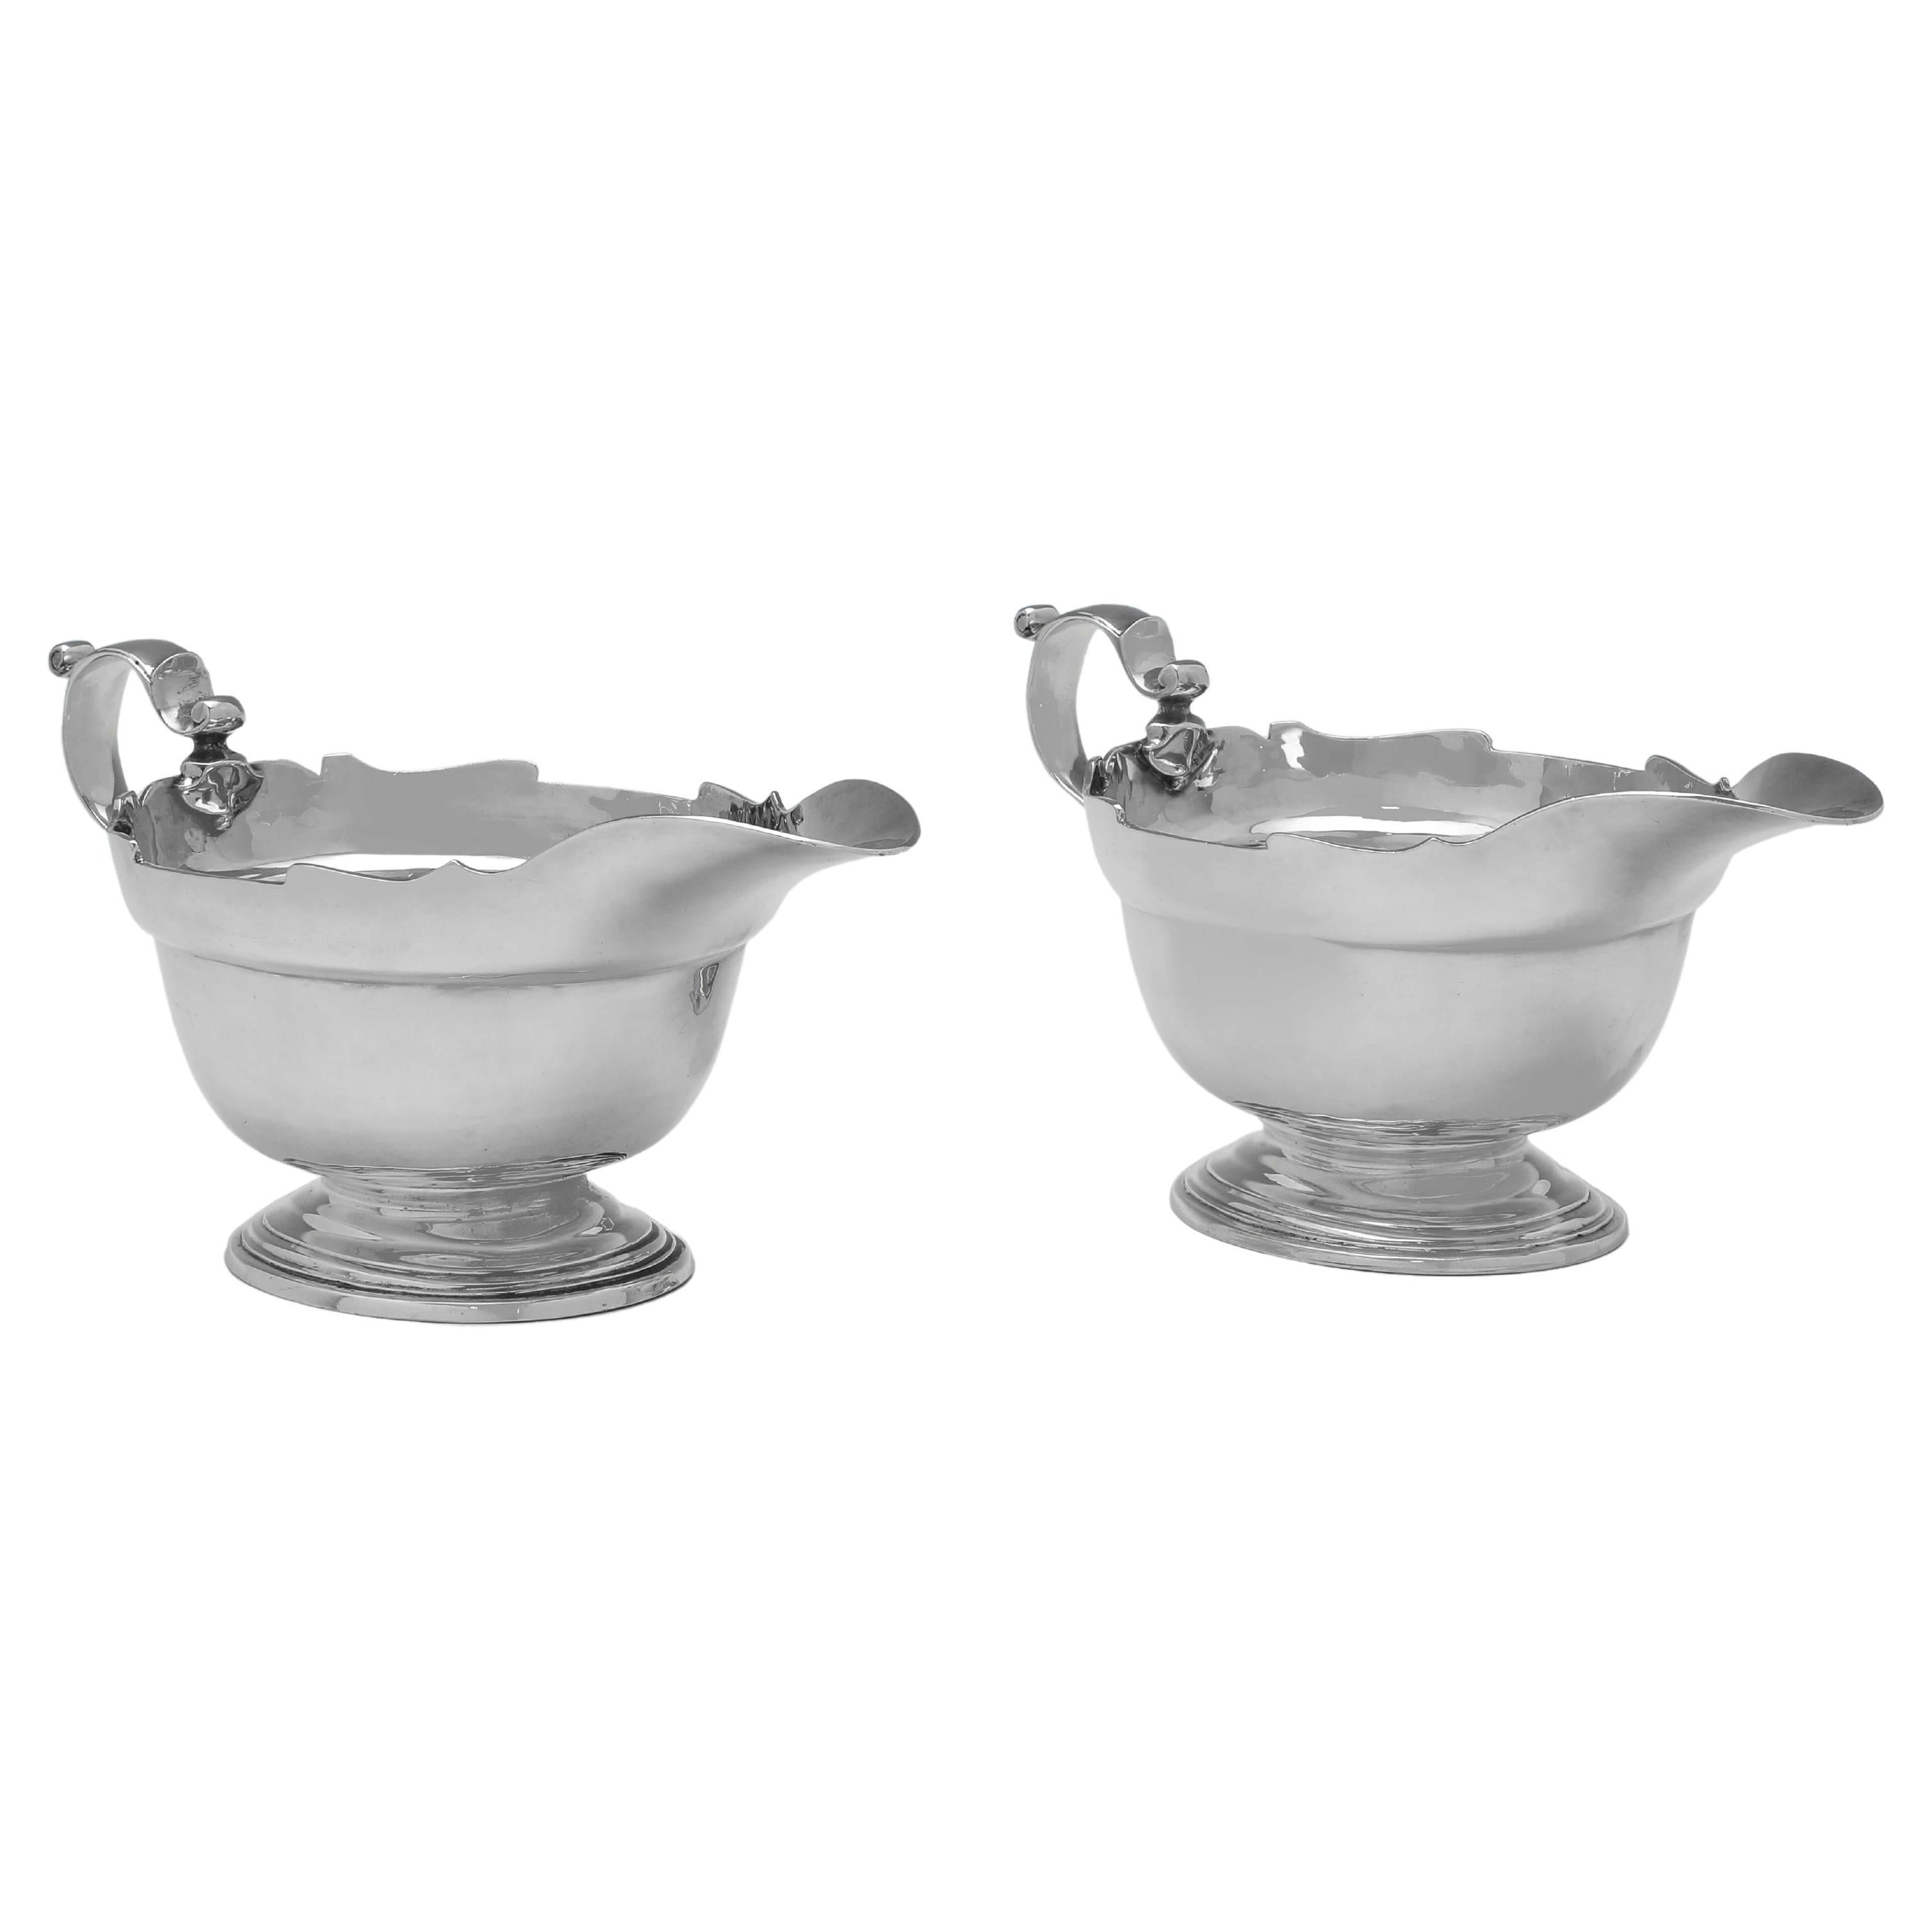 Heavy Art Deco Period Pair of Sterling Silver Gravy Boats, London 1932 / 1933 For Sale